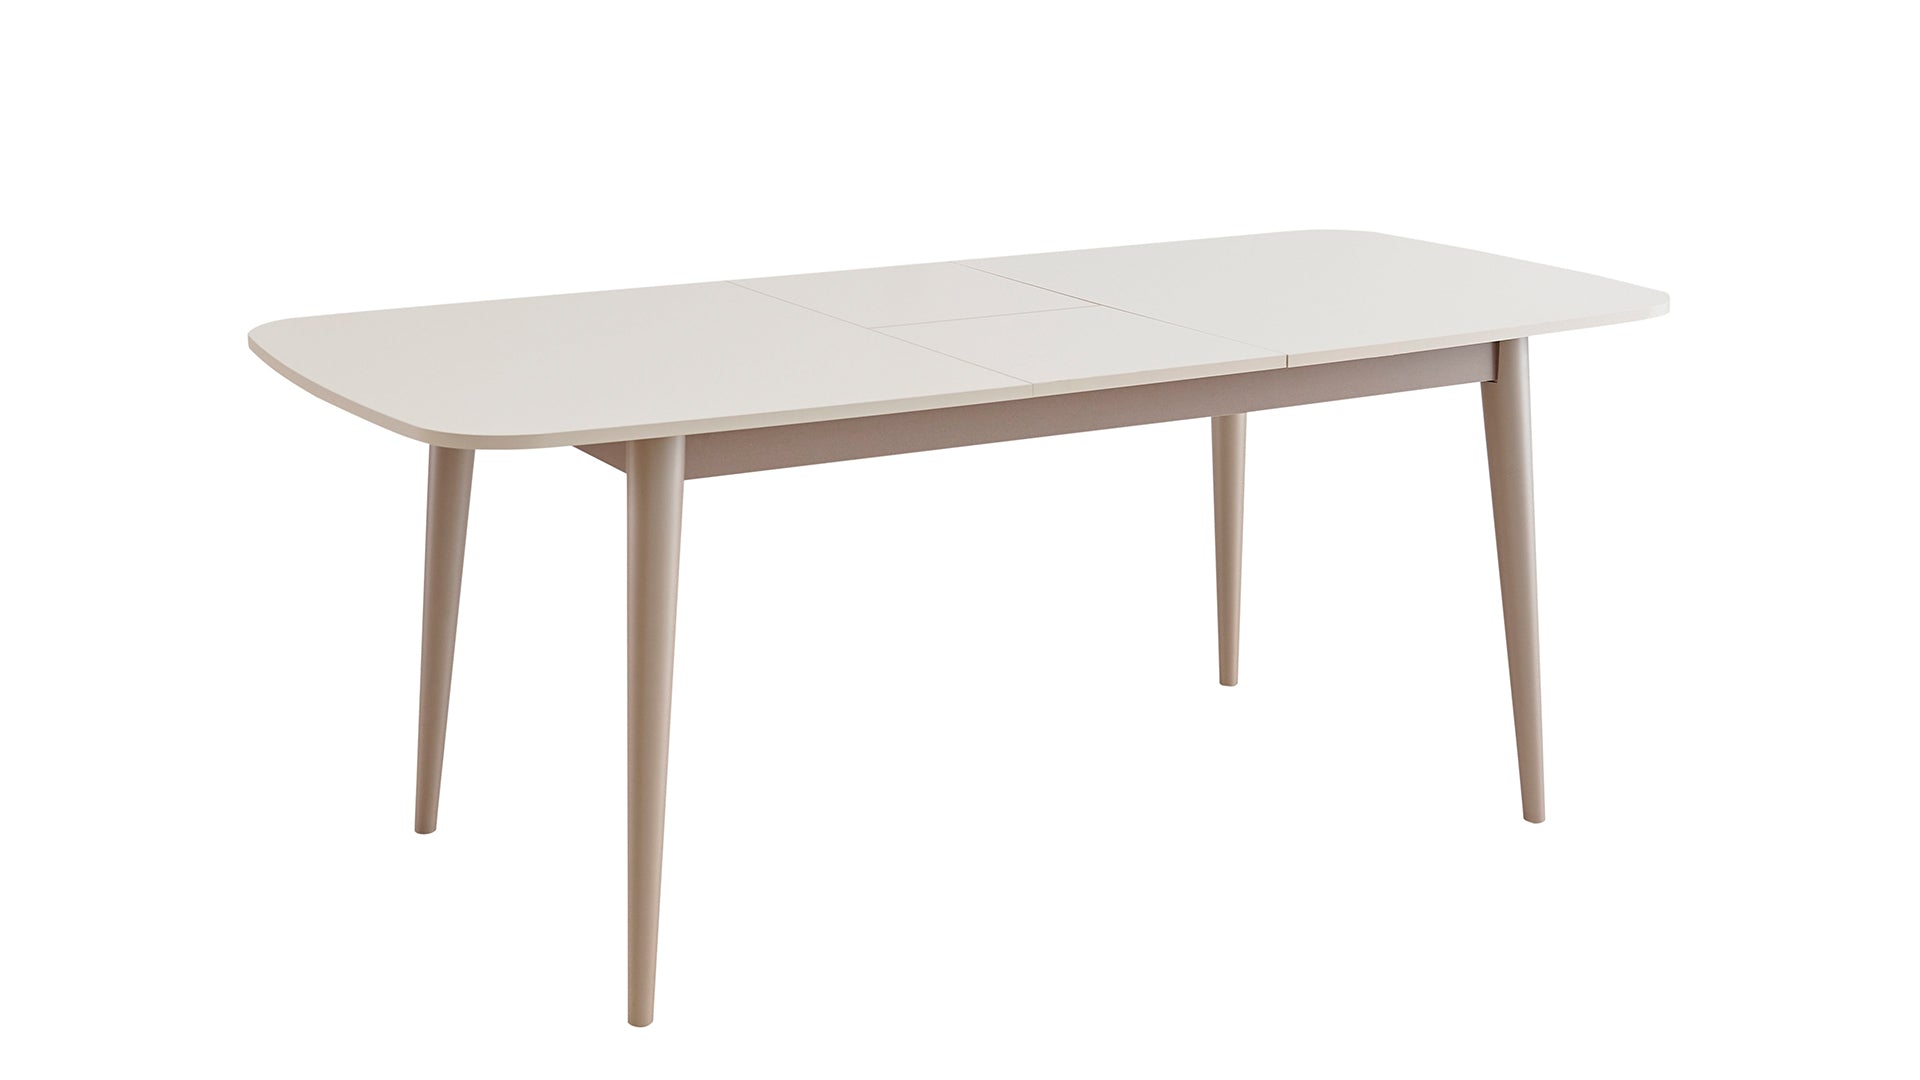 Milena Extendable Dining Table